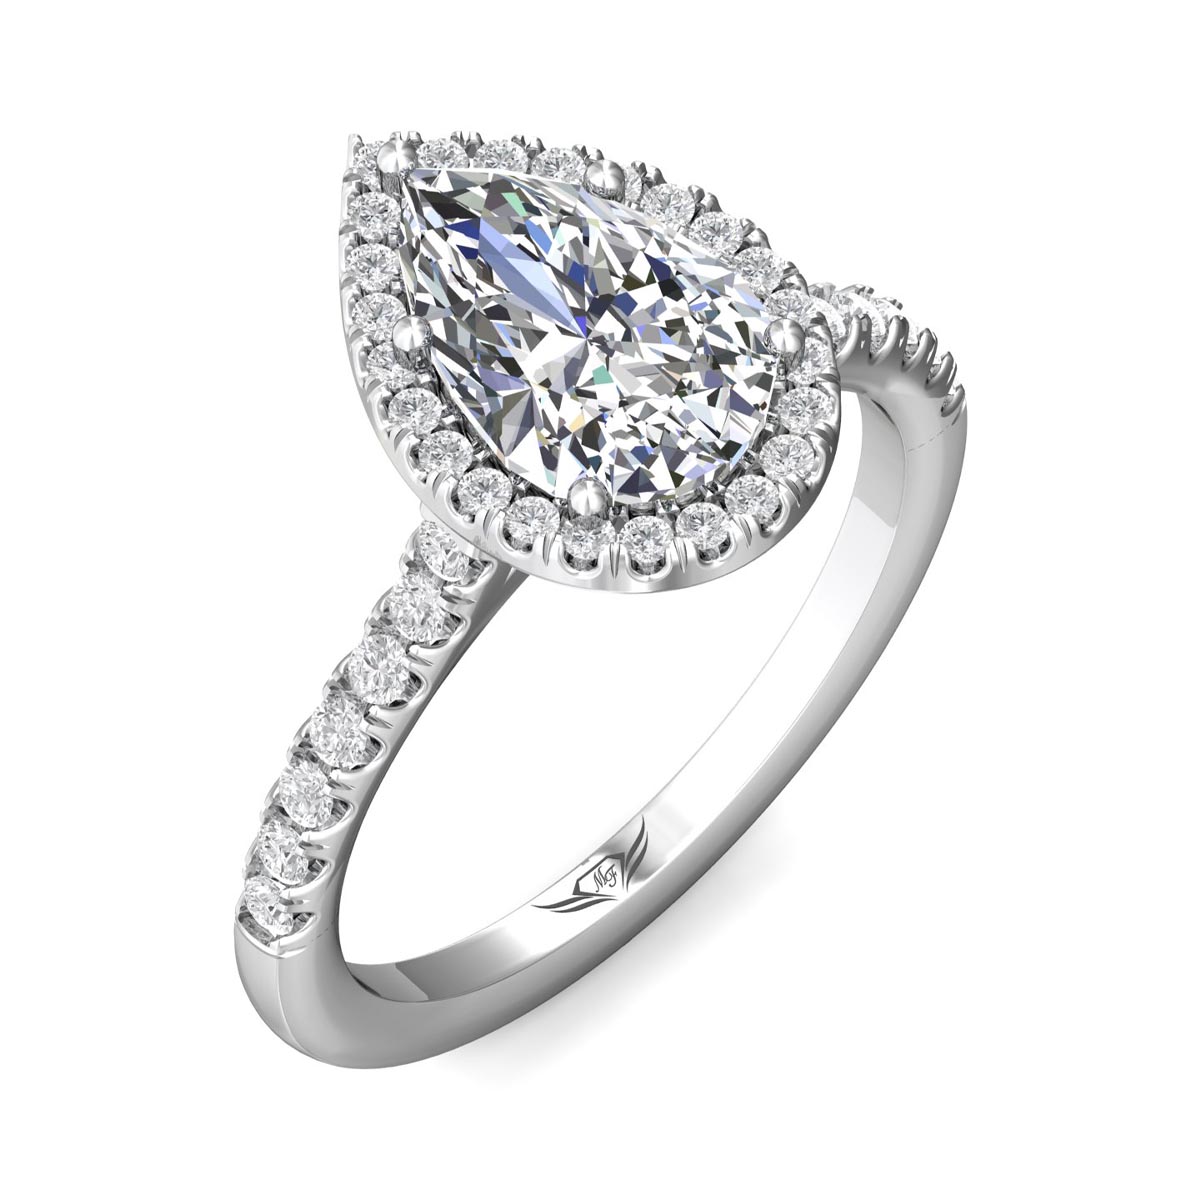 Martin Flyer Pear Diamond Halo Engagement Ring in 14kt White Gold (1ct tw)